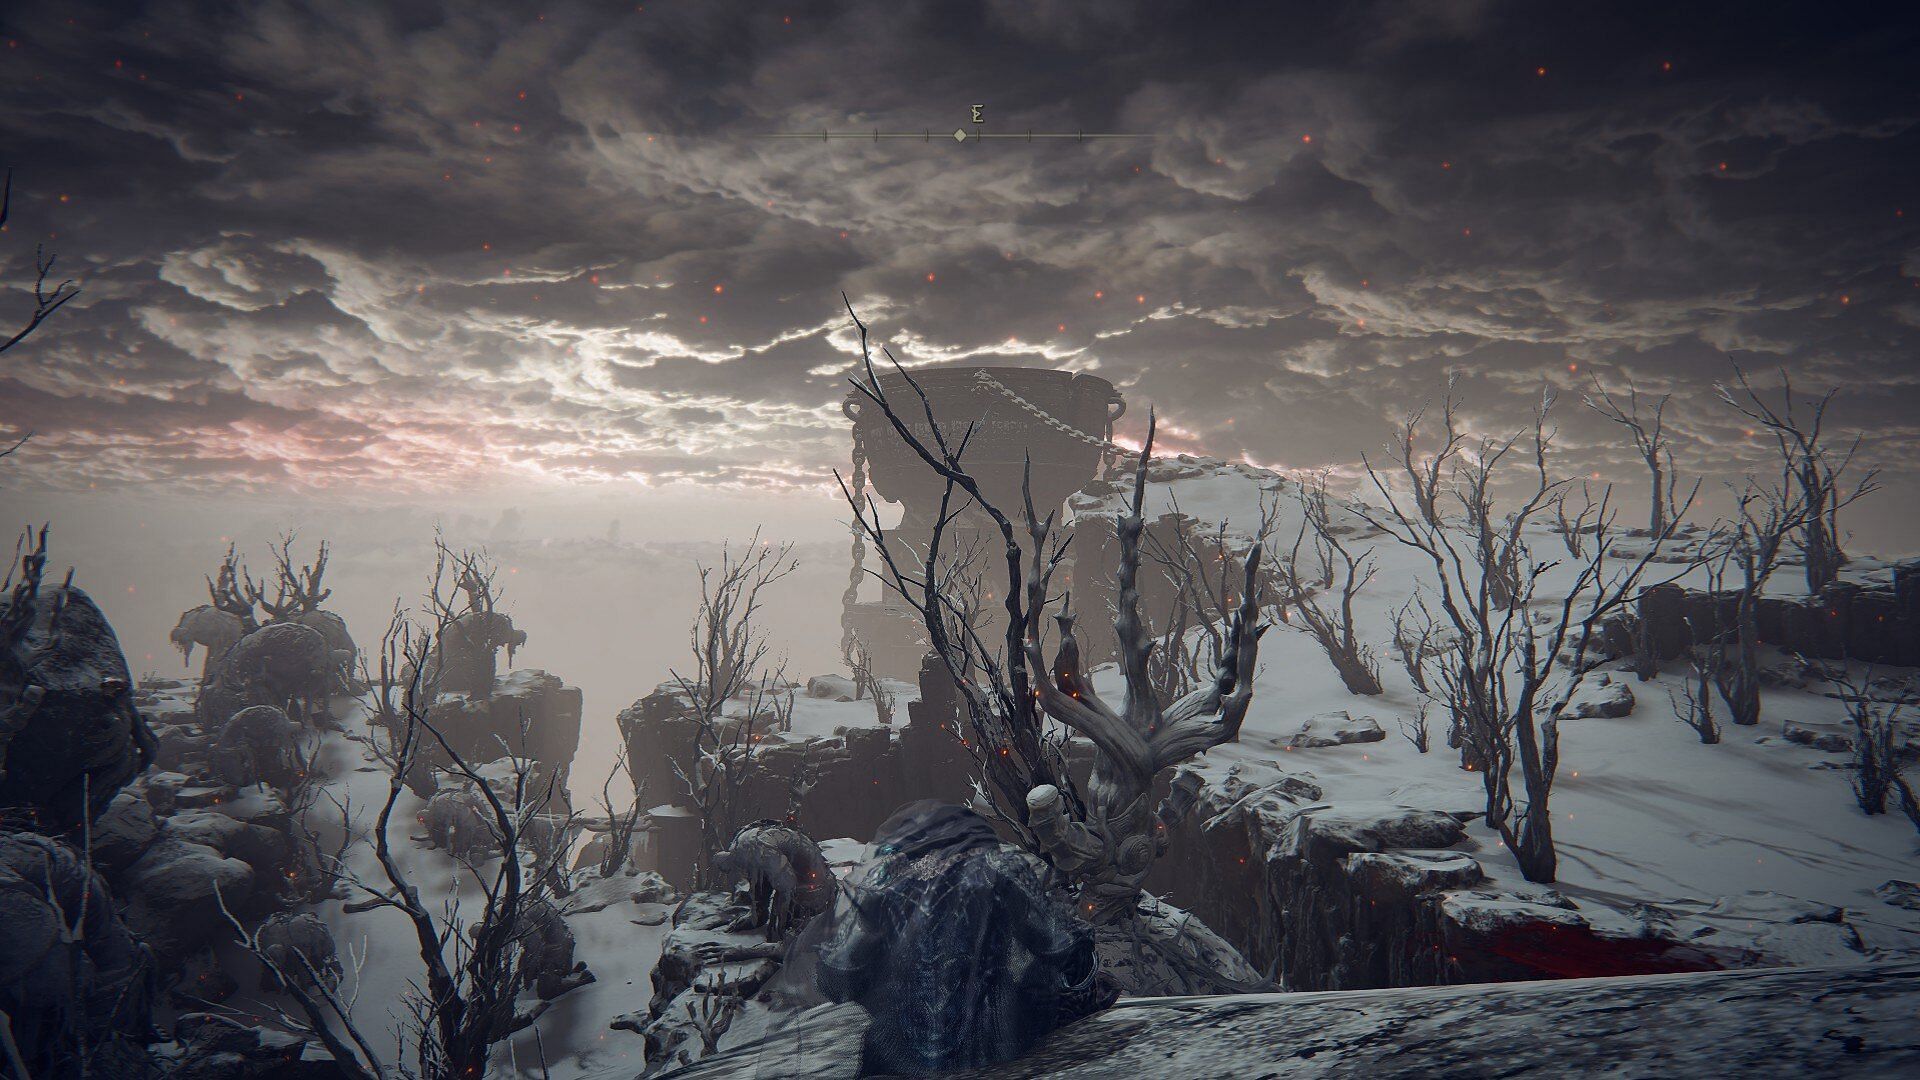 The Mountaintops of the Giants now lie scattered with the corpses of its inhabitants... (Image via FromSoftware)